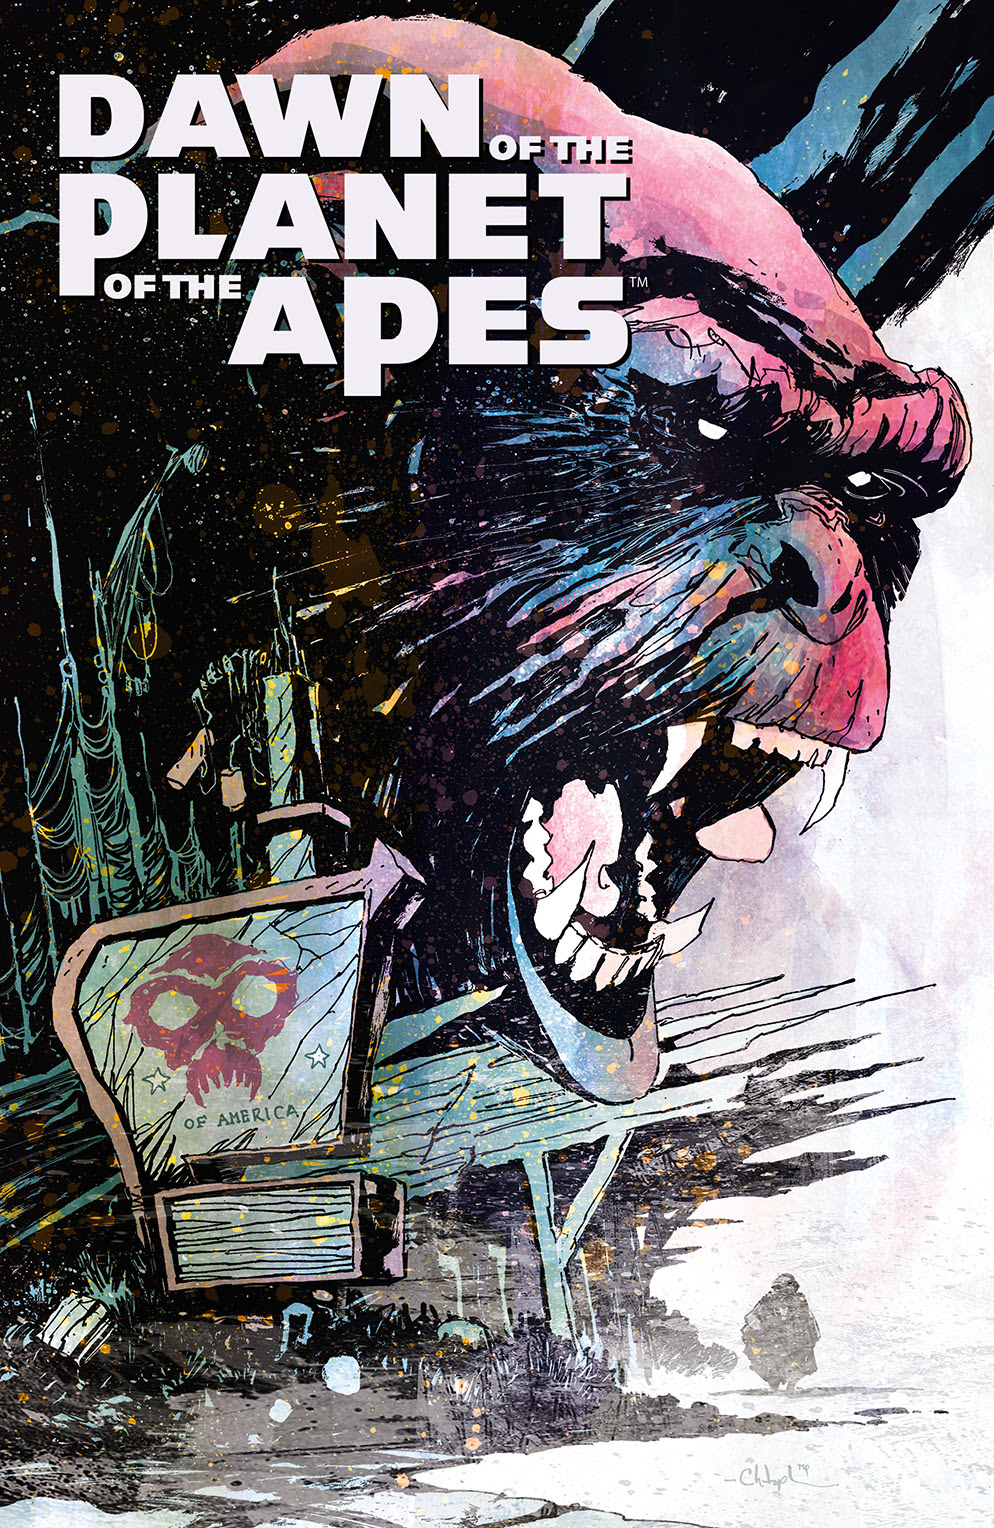 DAWN OF THE PLANET OF THE APES #2 Cover A by Christopher Mitten